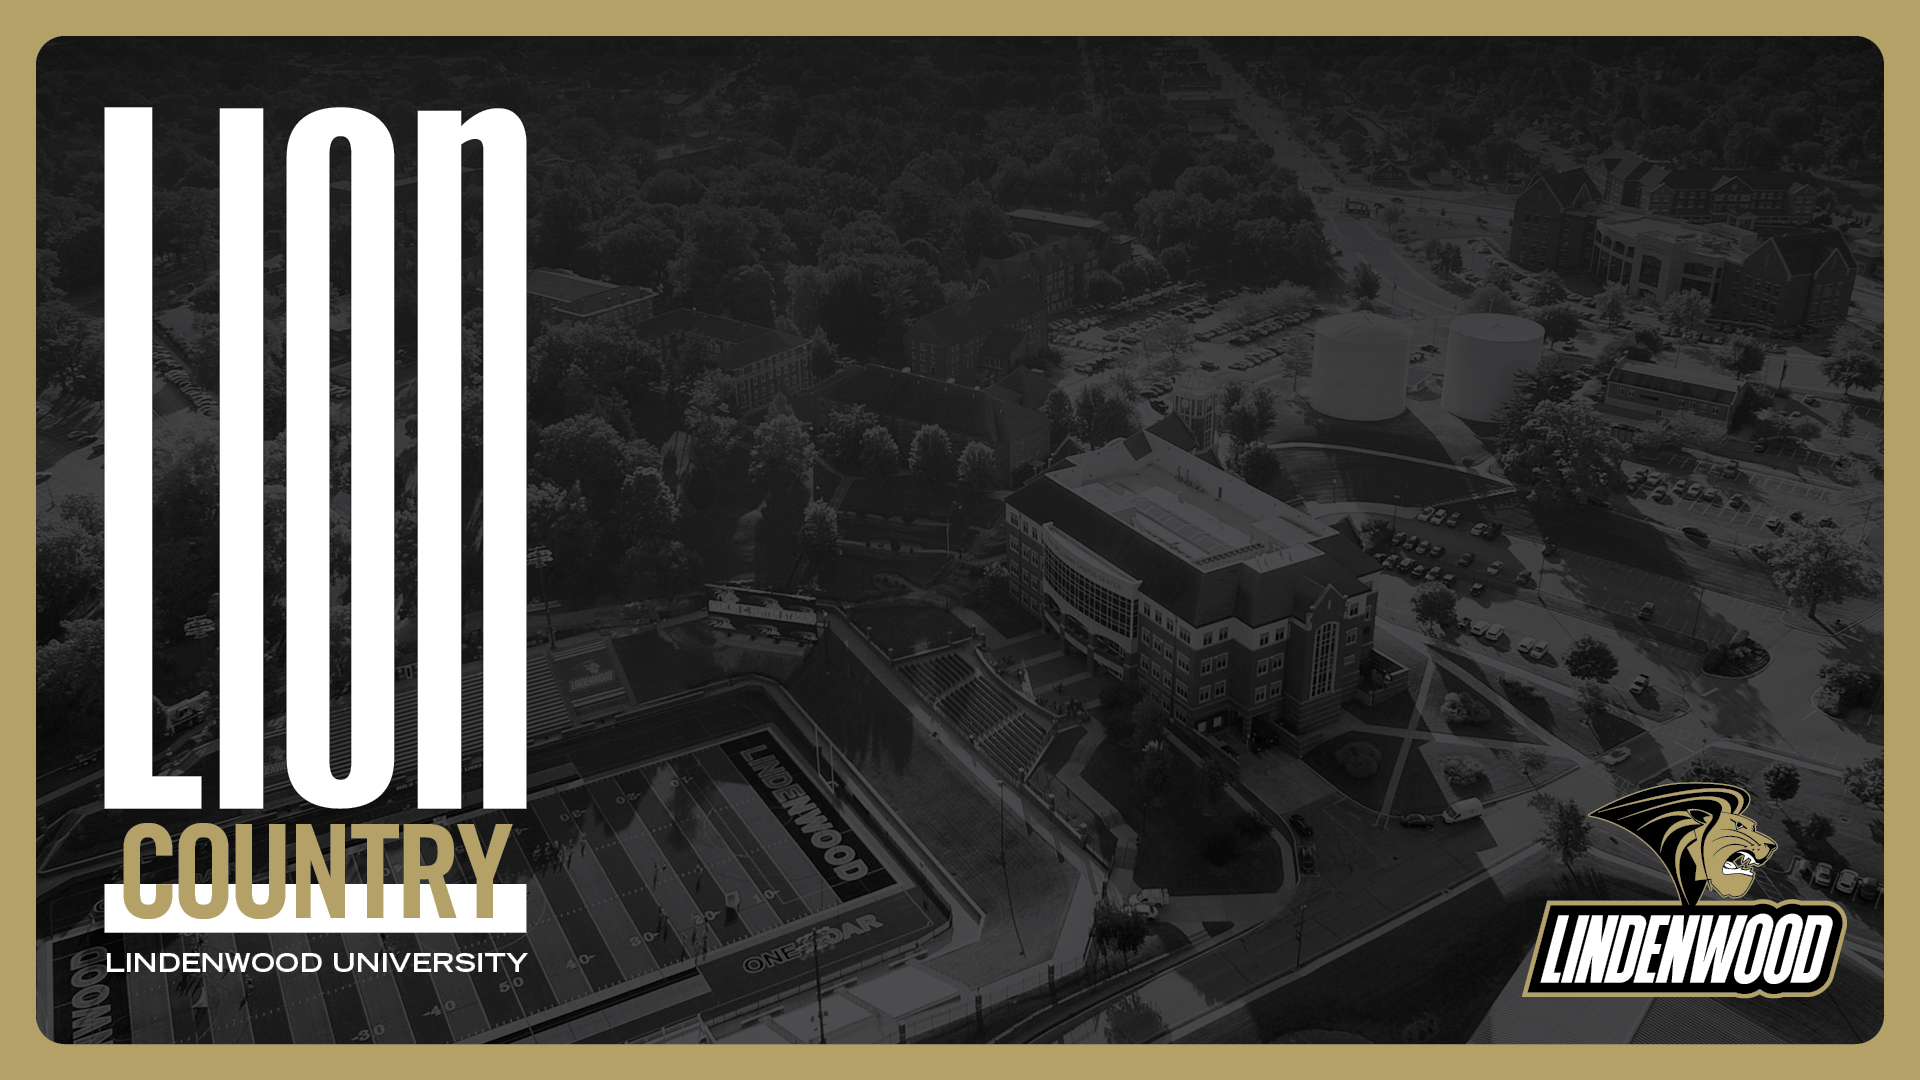 black and white drone shot of the entire campus. Stylized text saying lion country on the left side of the image